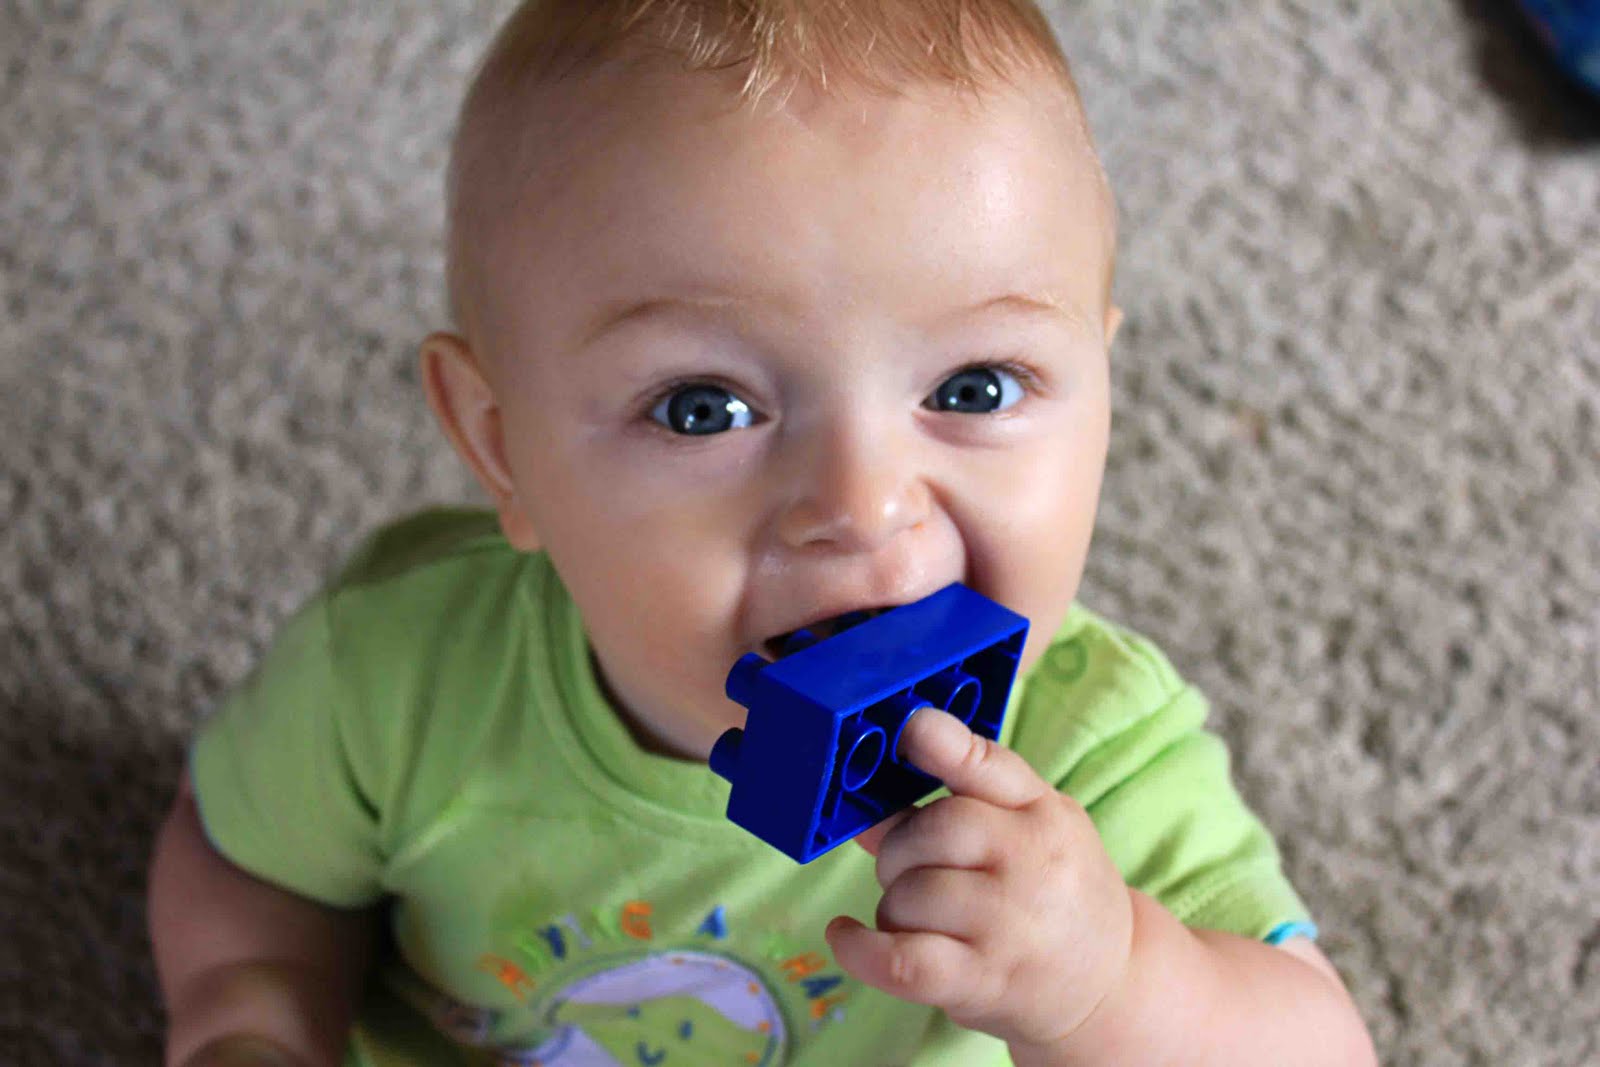 Baby eating a Lego block